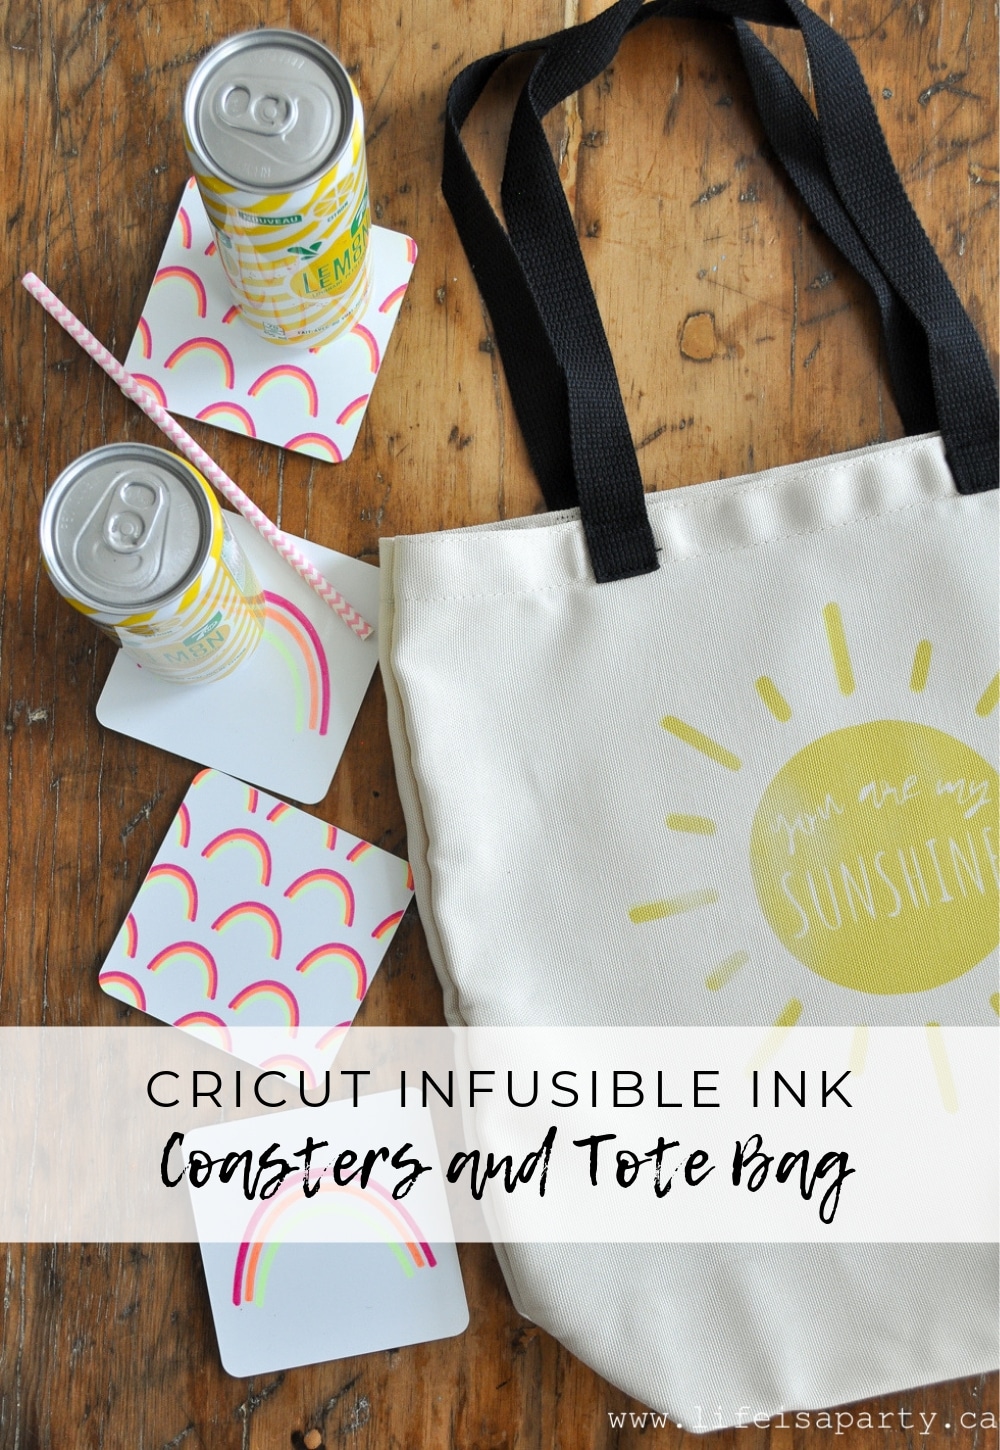 Cricut Infusible Ink Coasters and Tote Bag: create a "you are my sunshine" tote bag, or rainbow coasters with Cricut's new Infusible Ink.